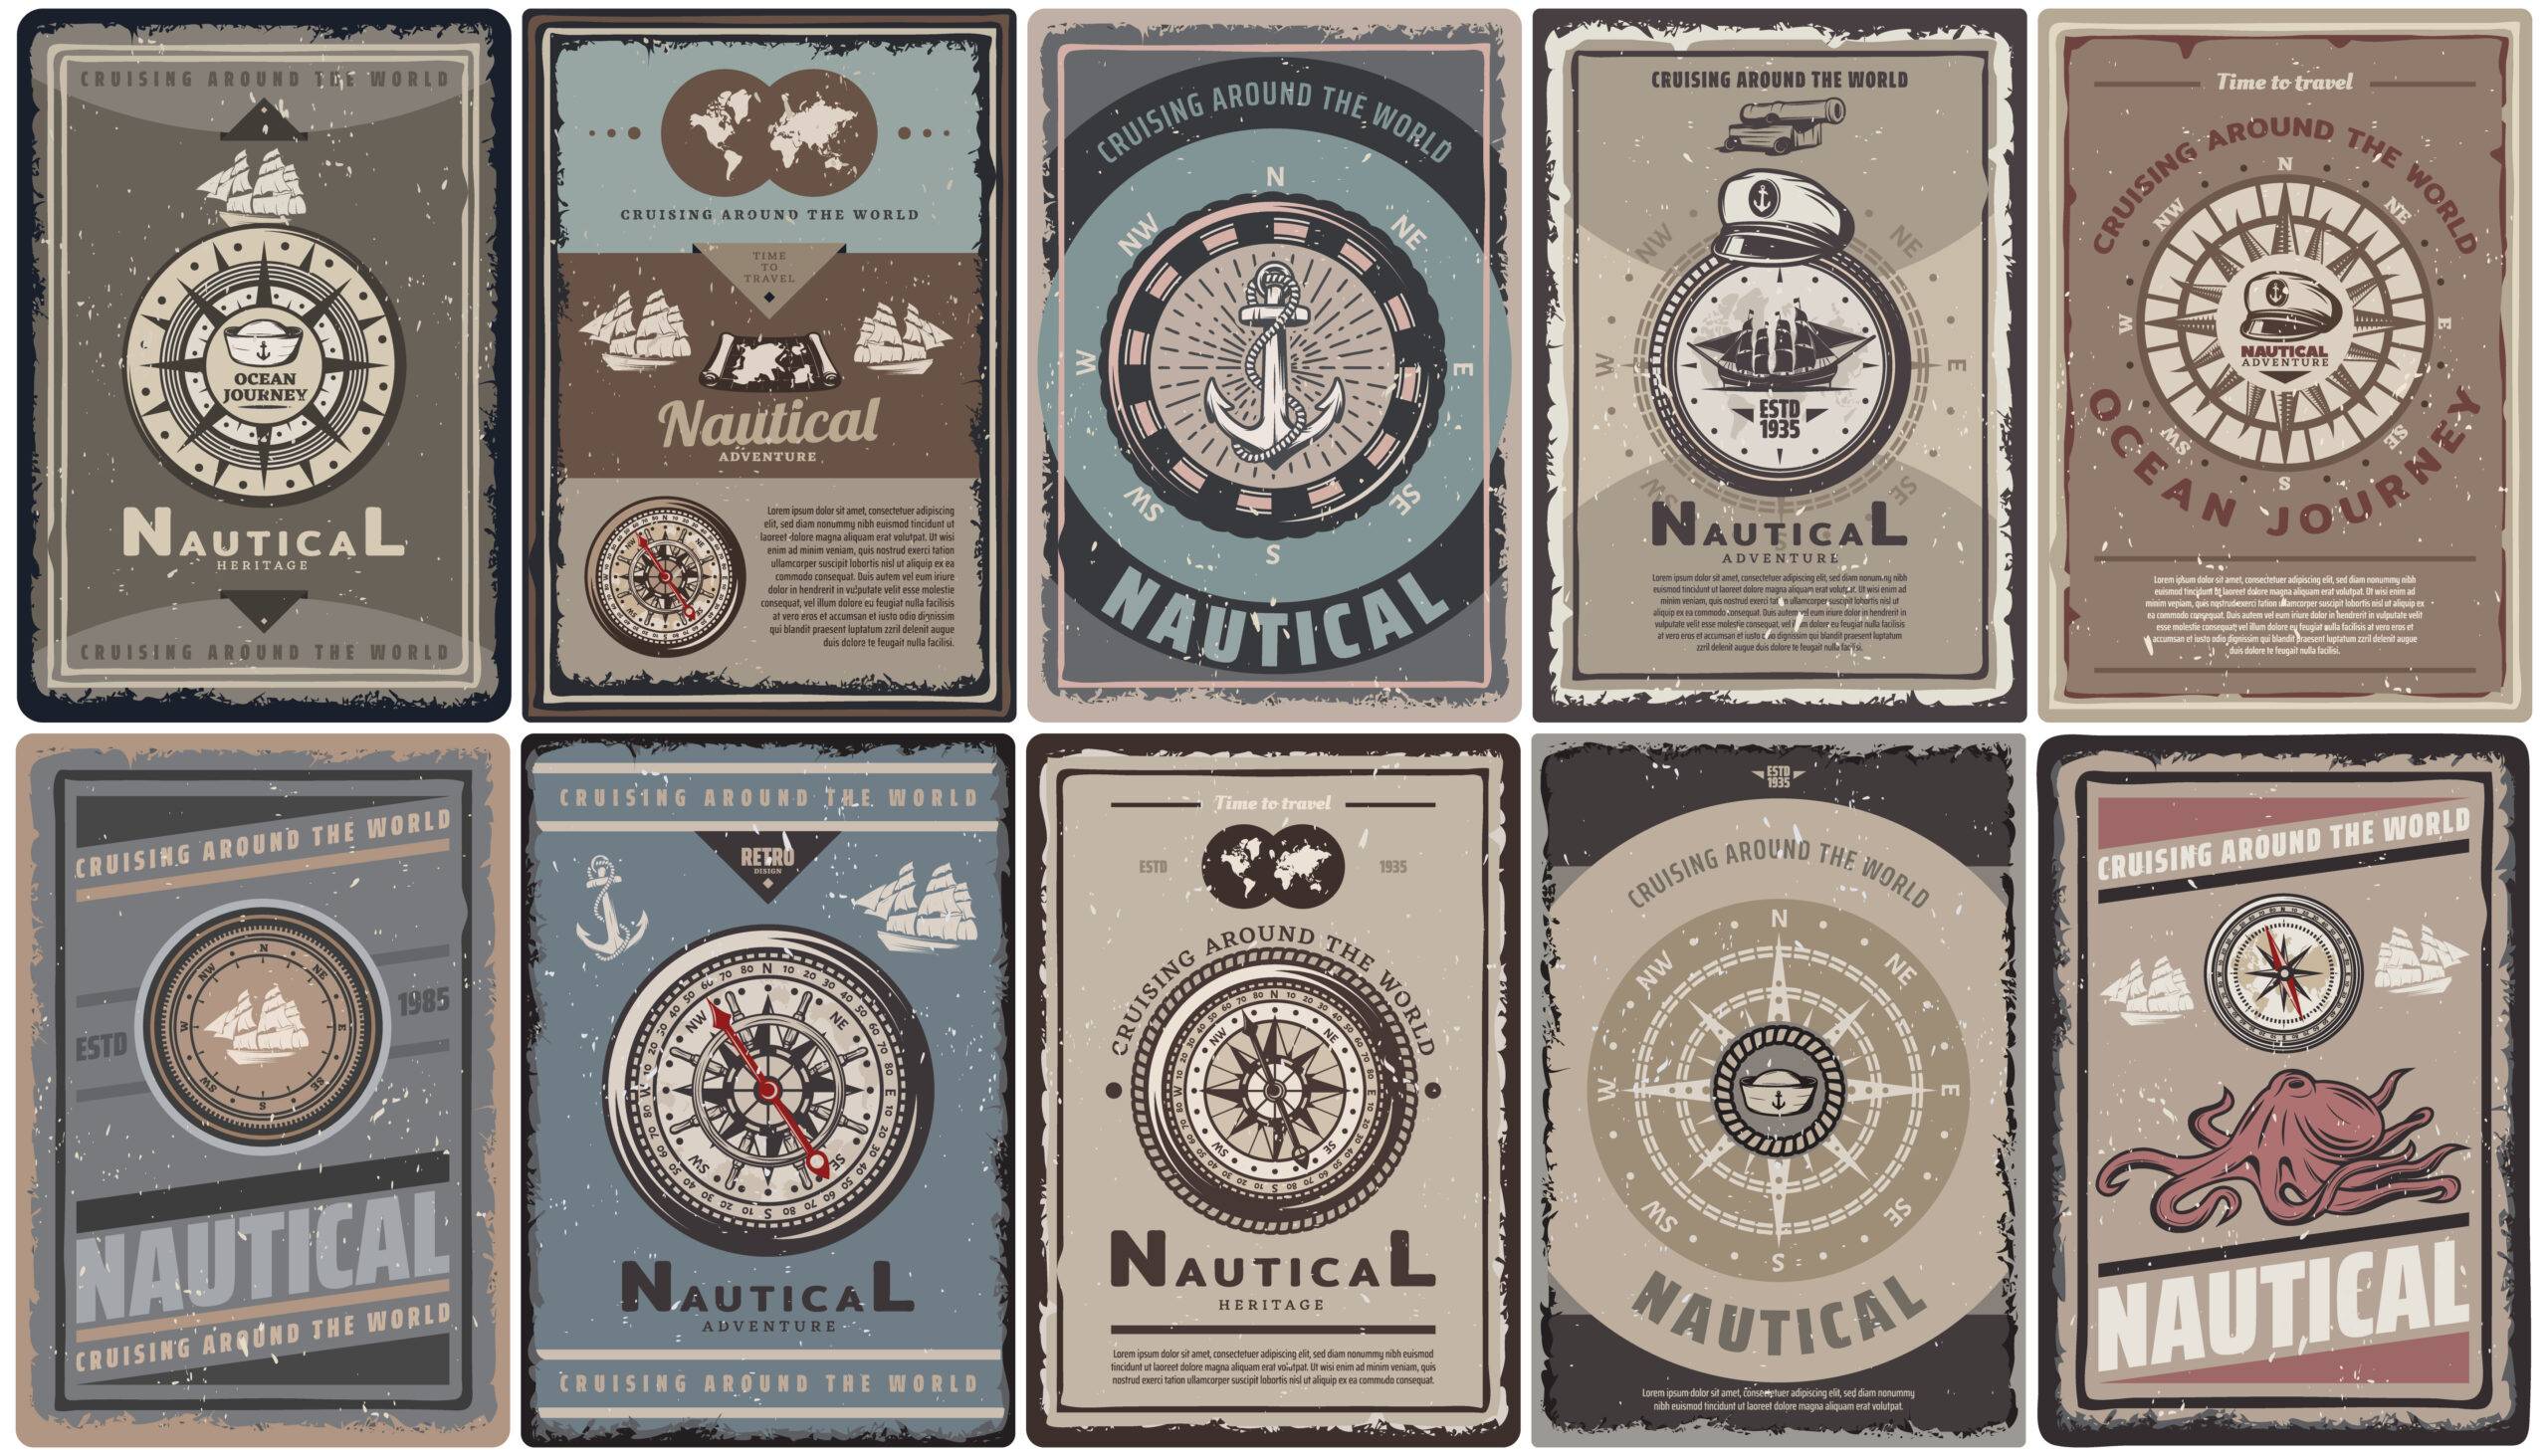 Nautical-themed posters featuring vintage designs, compasses, ships, anchors, and oceanic elements, titled "Cruising Around the World."